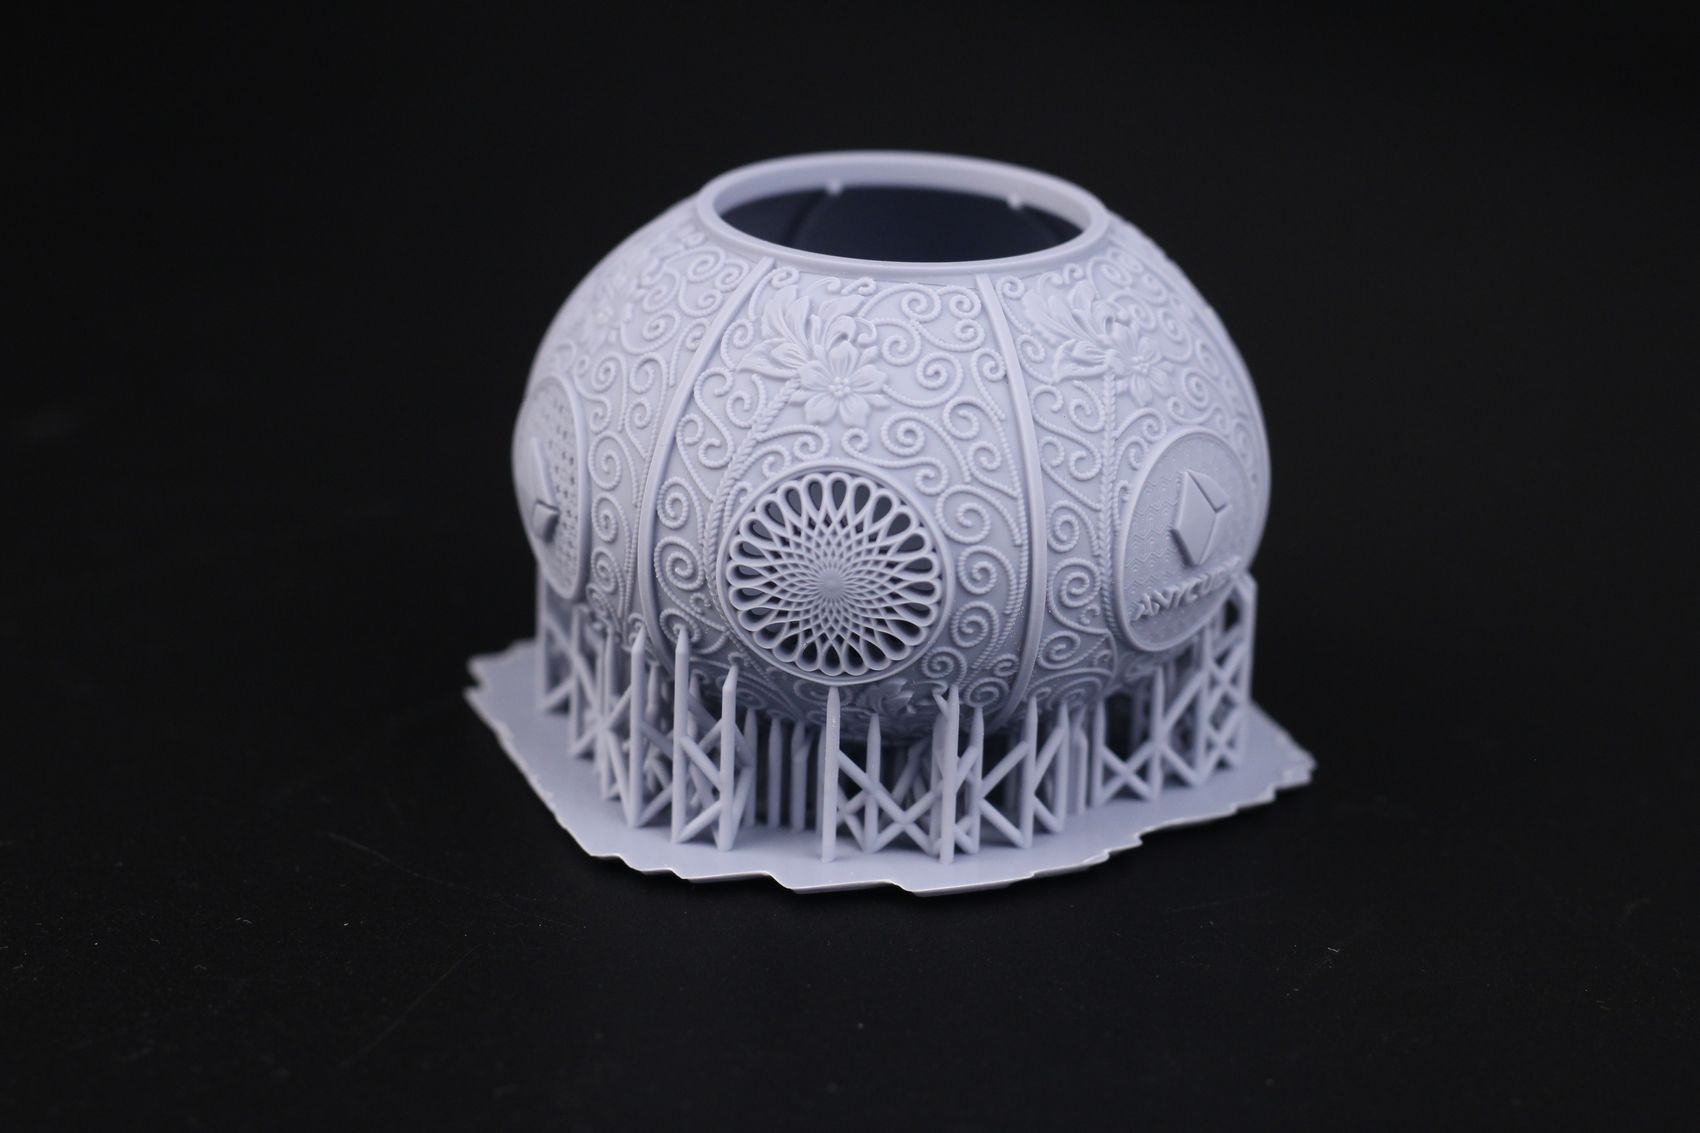 Anycubic DLP Test Model on Photon D24 | Anycubic Photon D2 Review: DLP Resin 3D Printer